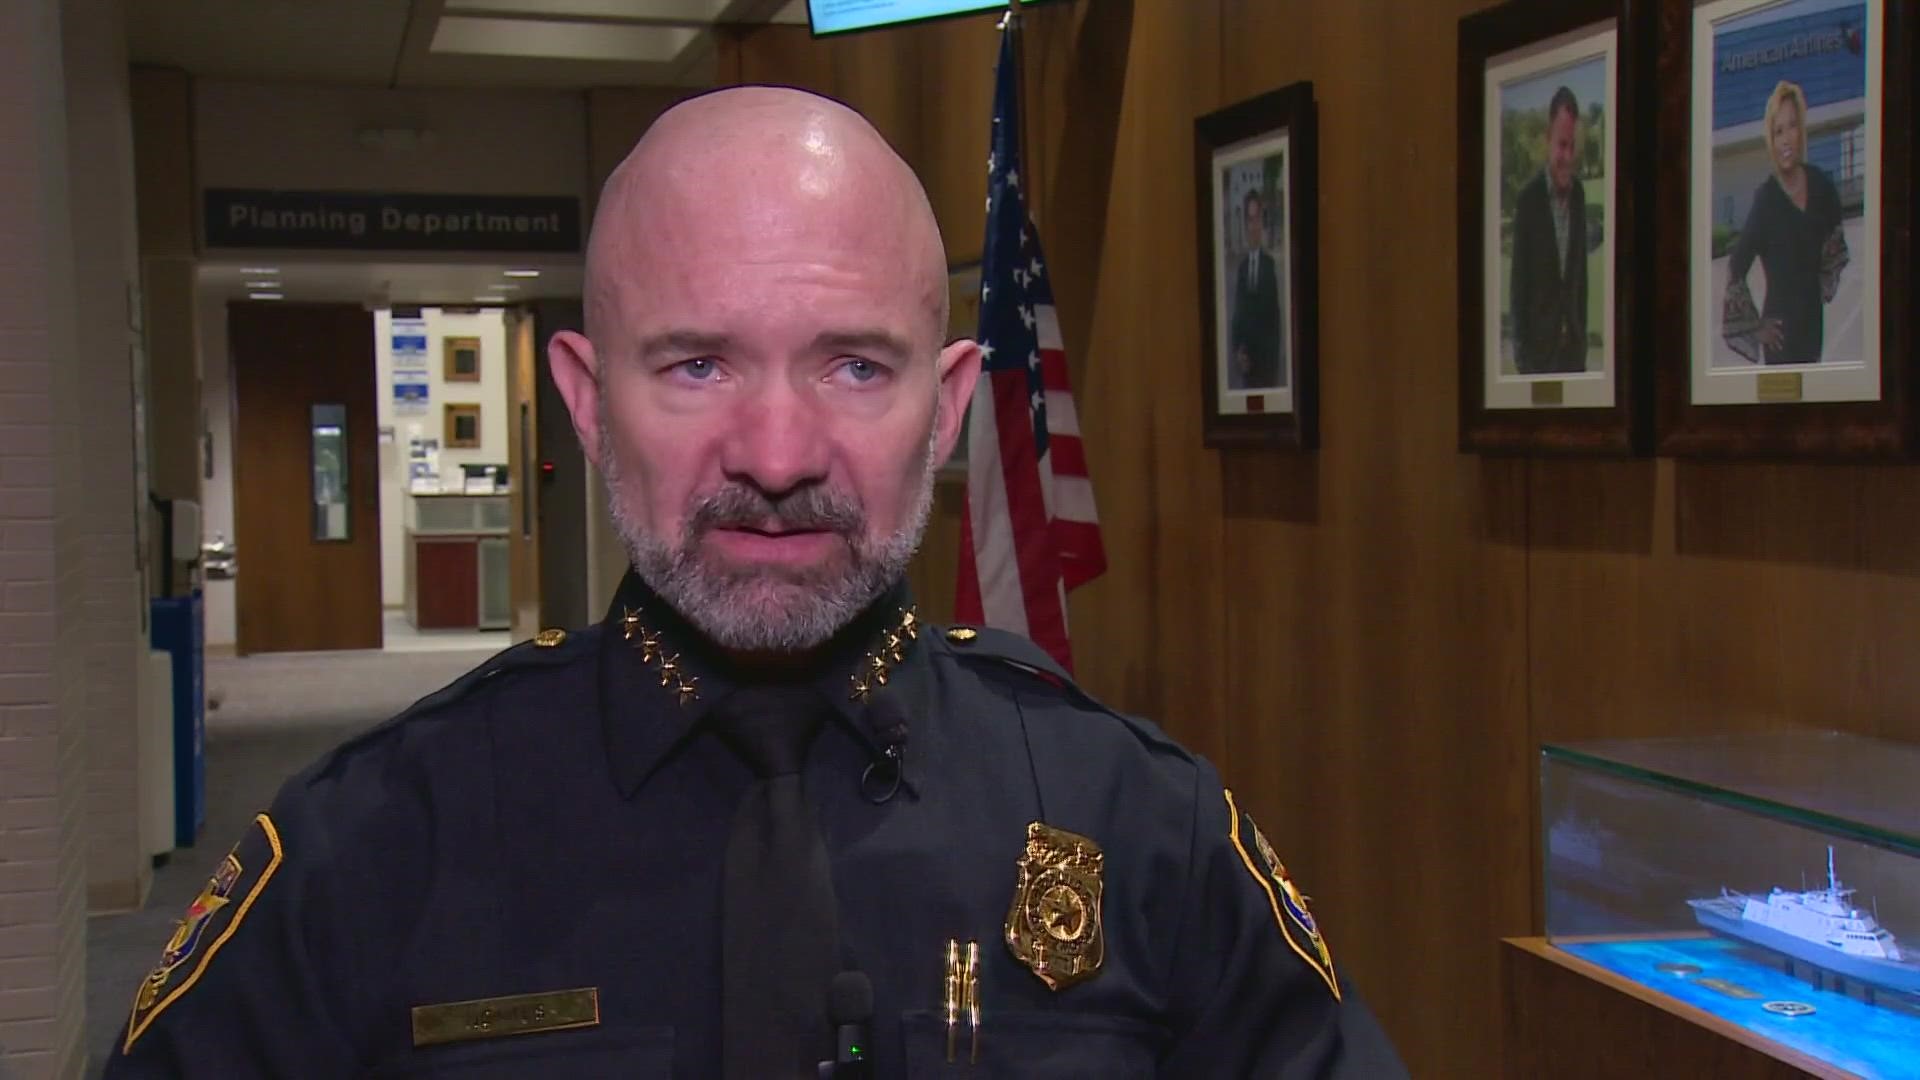 Fort Worth's Chief of Police Neil Noakes shared his proposal for a community advisory board with city leaders on Tuesday.